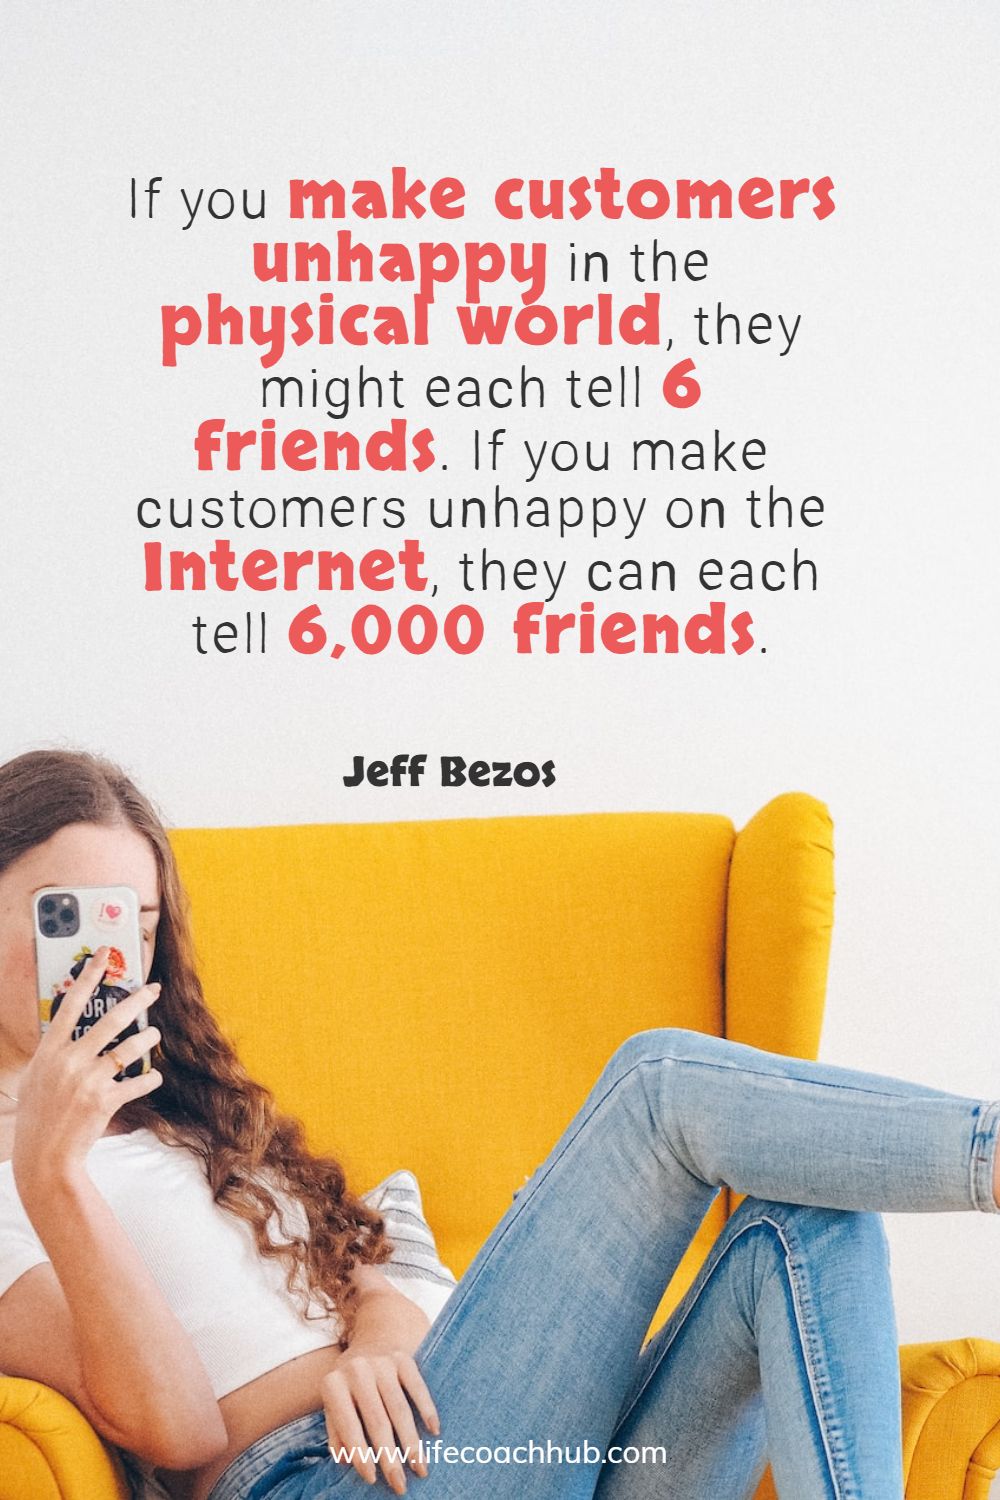 If you make customers unhappy in the physical world, they might each tell 6 friends. If you make customers unhappy on the Internet, they can each tell 6,000 friends. Jeff Bezos Coaching Quote